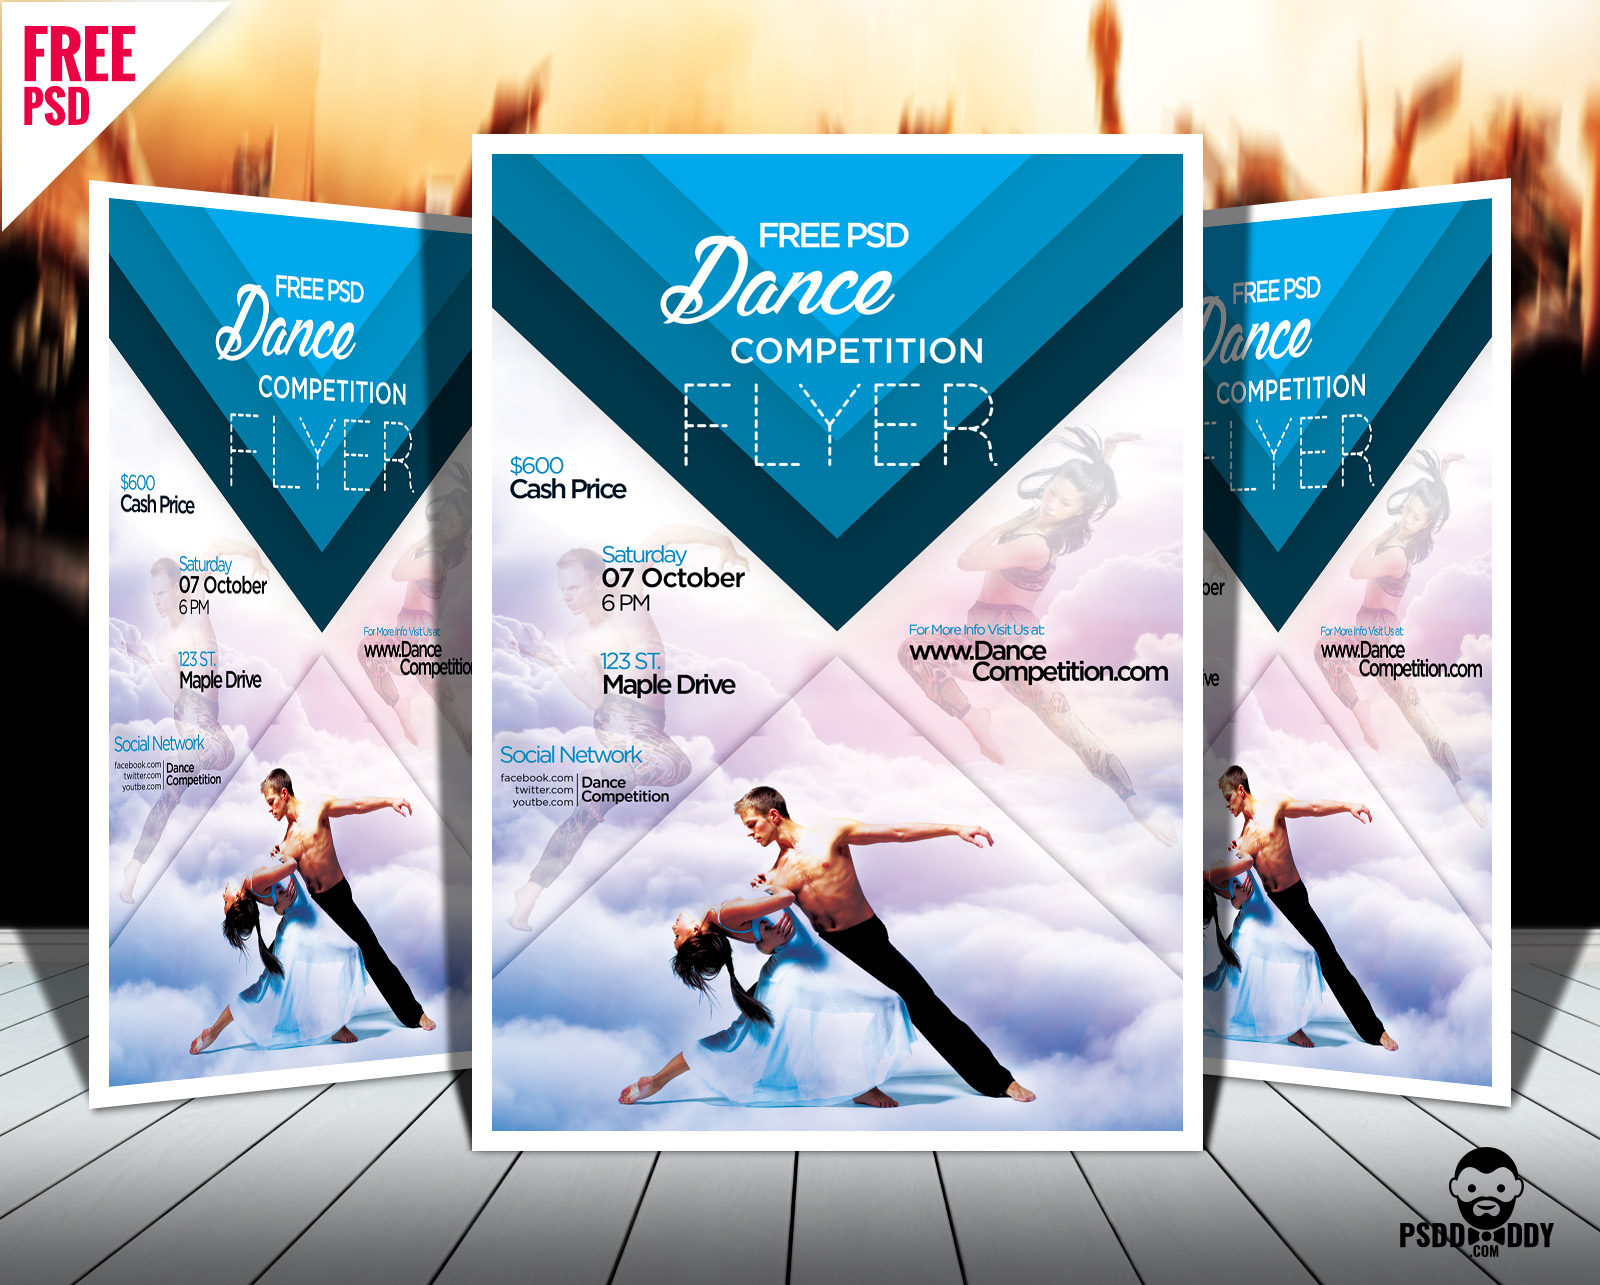 Download Dance Competition Flyer Psd Psddaddy Com